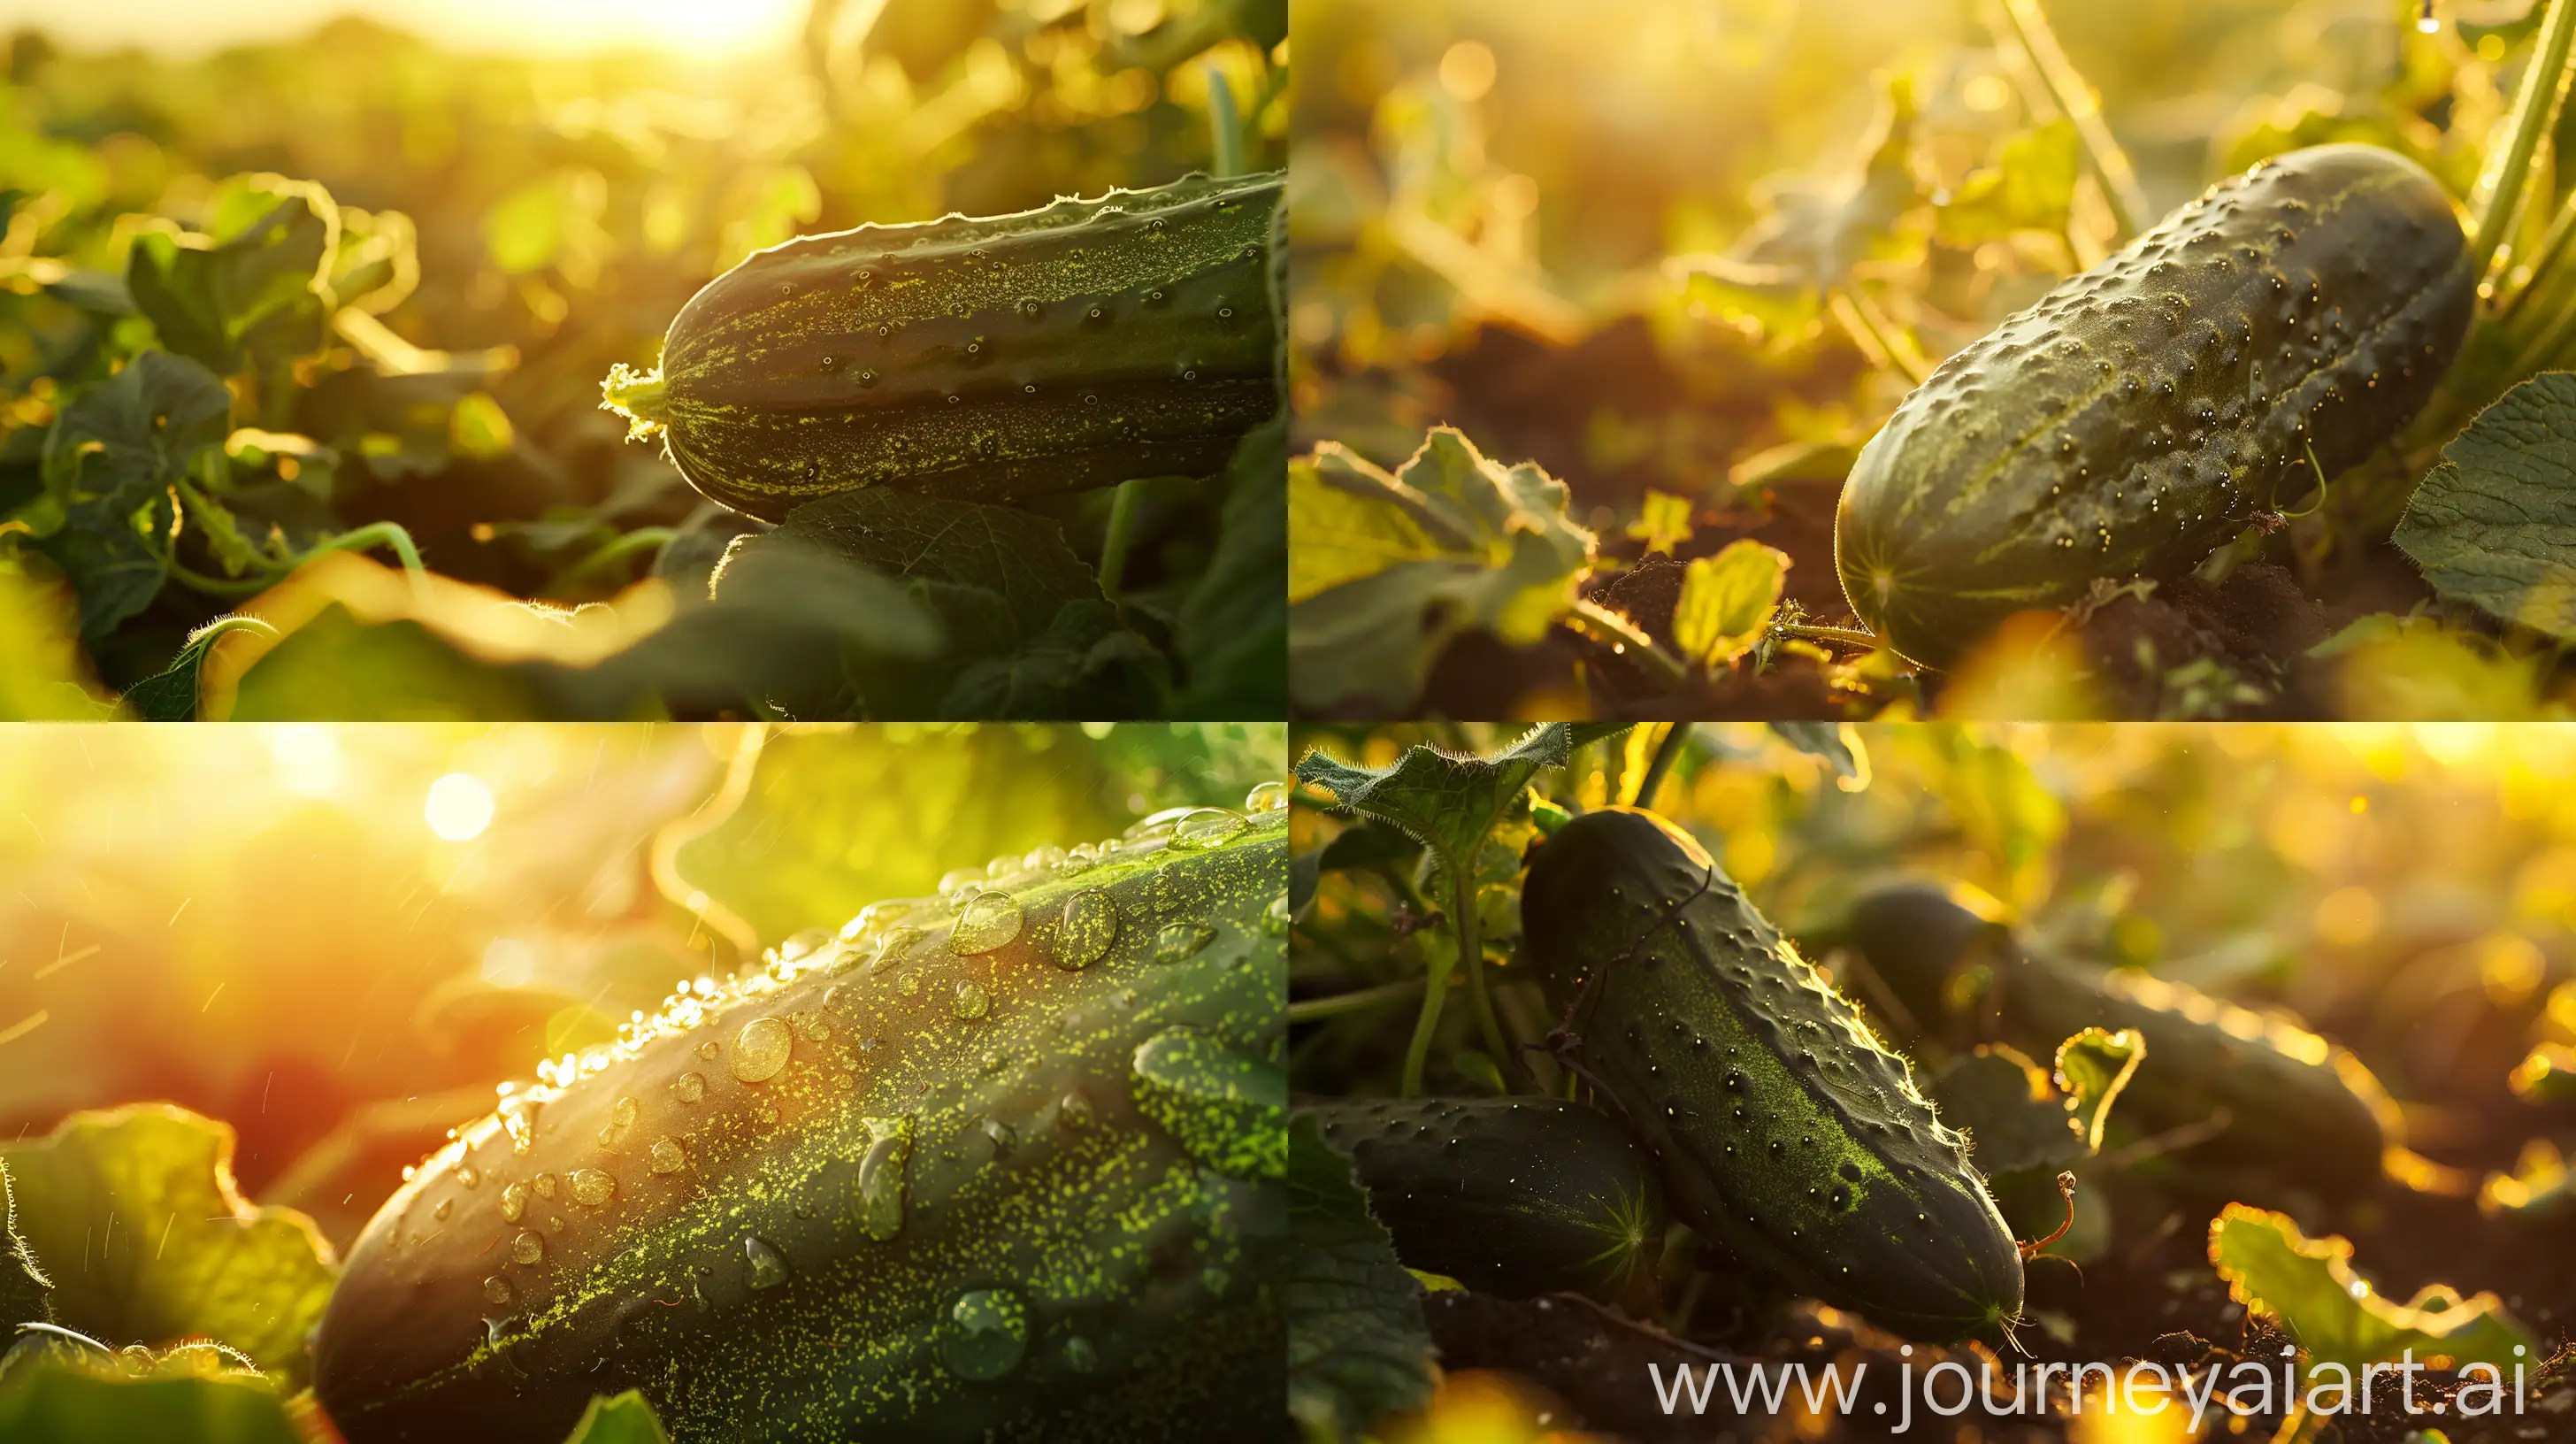 Close up high detailed photo capturing a Cucumber, Parisian. The sun, casting a warm, golden glow, bathes the scene in a serene ambiance, illuminating the intricate details of each element. The composition centers on a Cucumber, Parisian. Tickled by pickles? Pick this dark-green French heirloom gherkin with firm thick flesh and precious few seeds. Great for home preserving. Harvest in just 50 days–less than 2 months–for picking and pickling.. The image evokes a sense of tranquility and natural beauty, inviting viewers to immerse themselves in the splendor of the landscape. --ar 16:9 